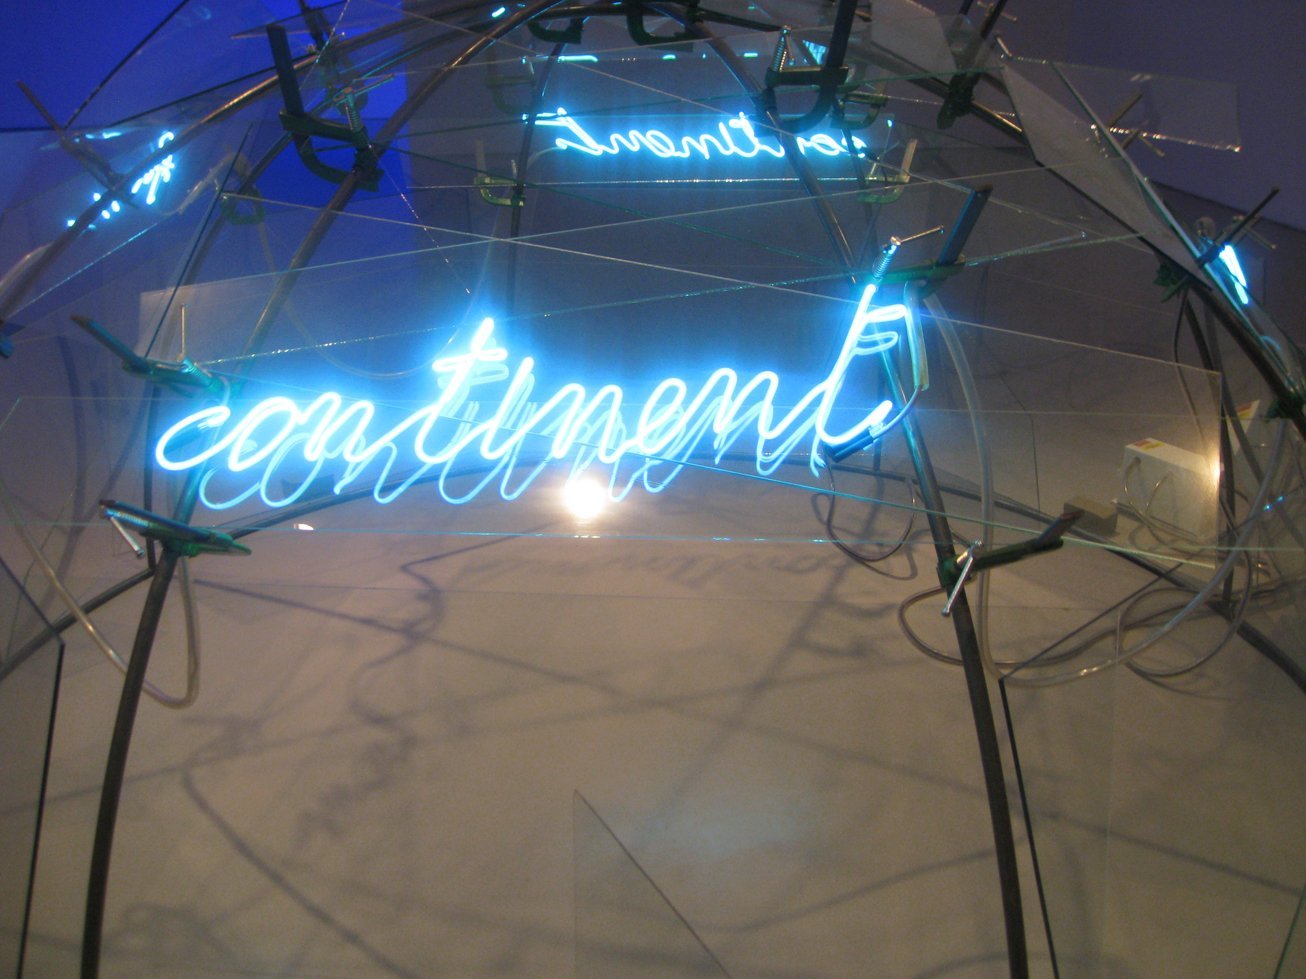 Mario Merz, “From Continent to Continent,” 1985. Steel, glass, neon, clay, metal cables, electrical wire, transformer.